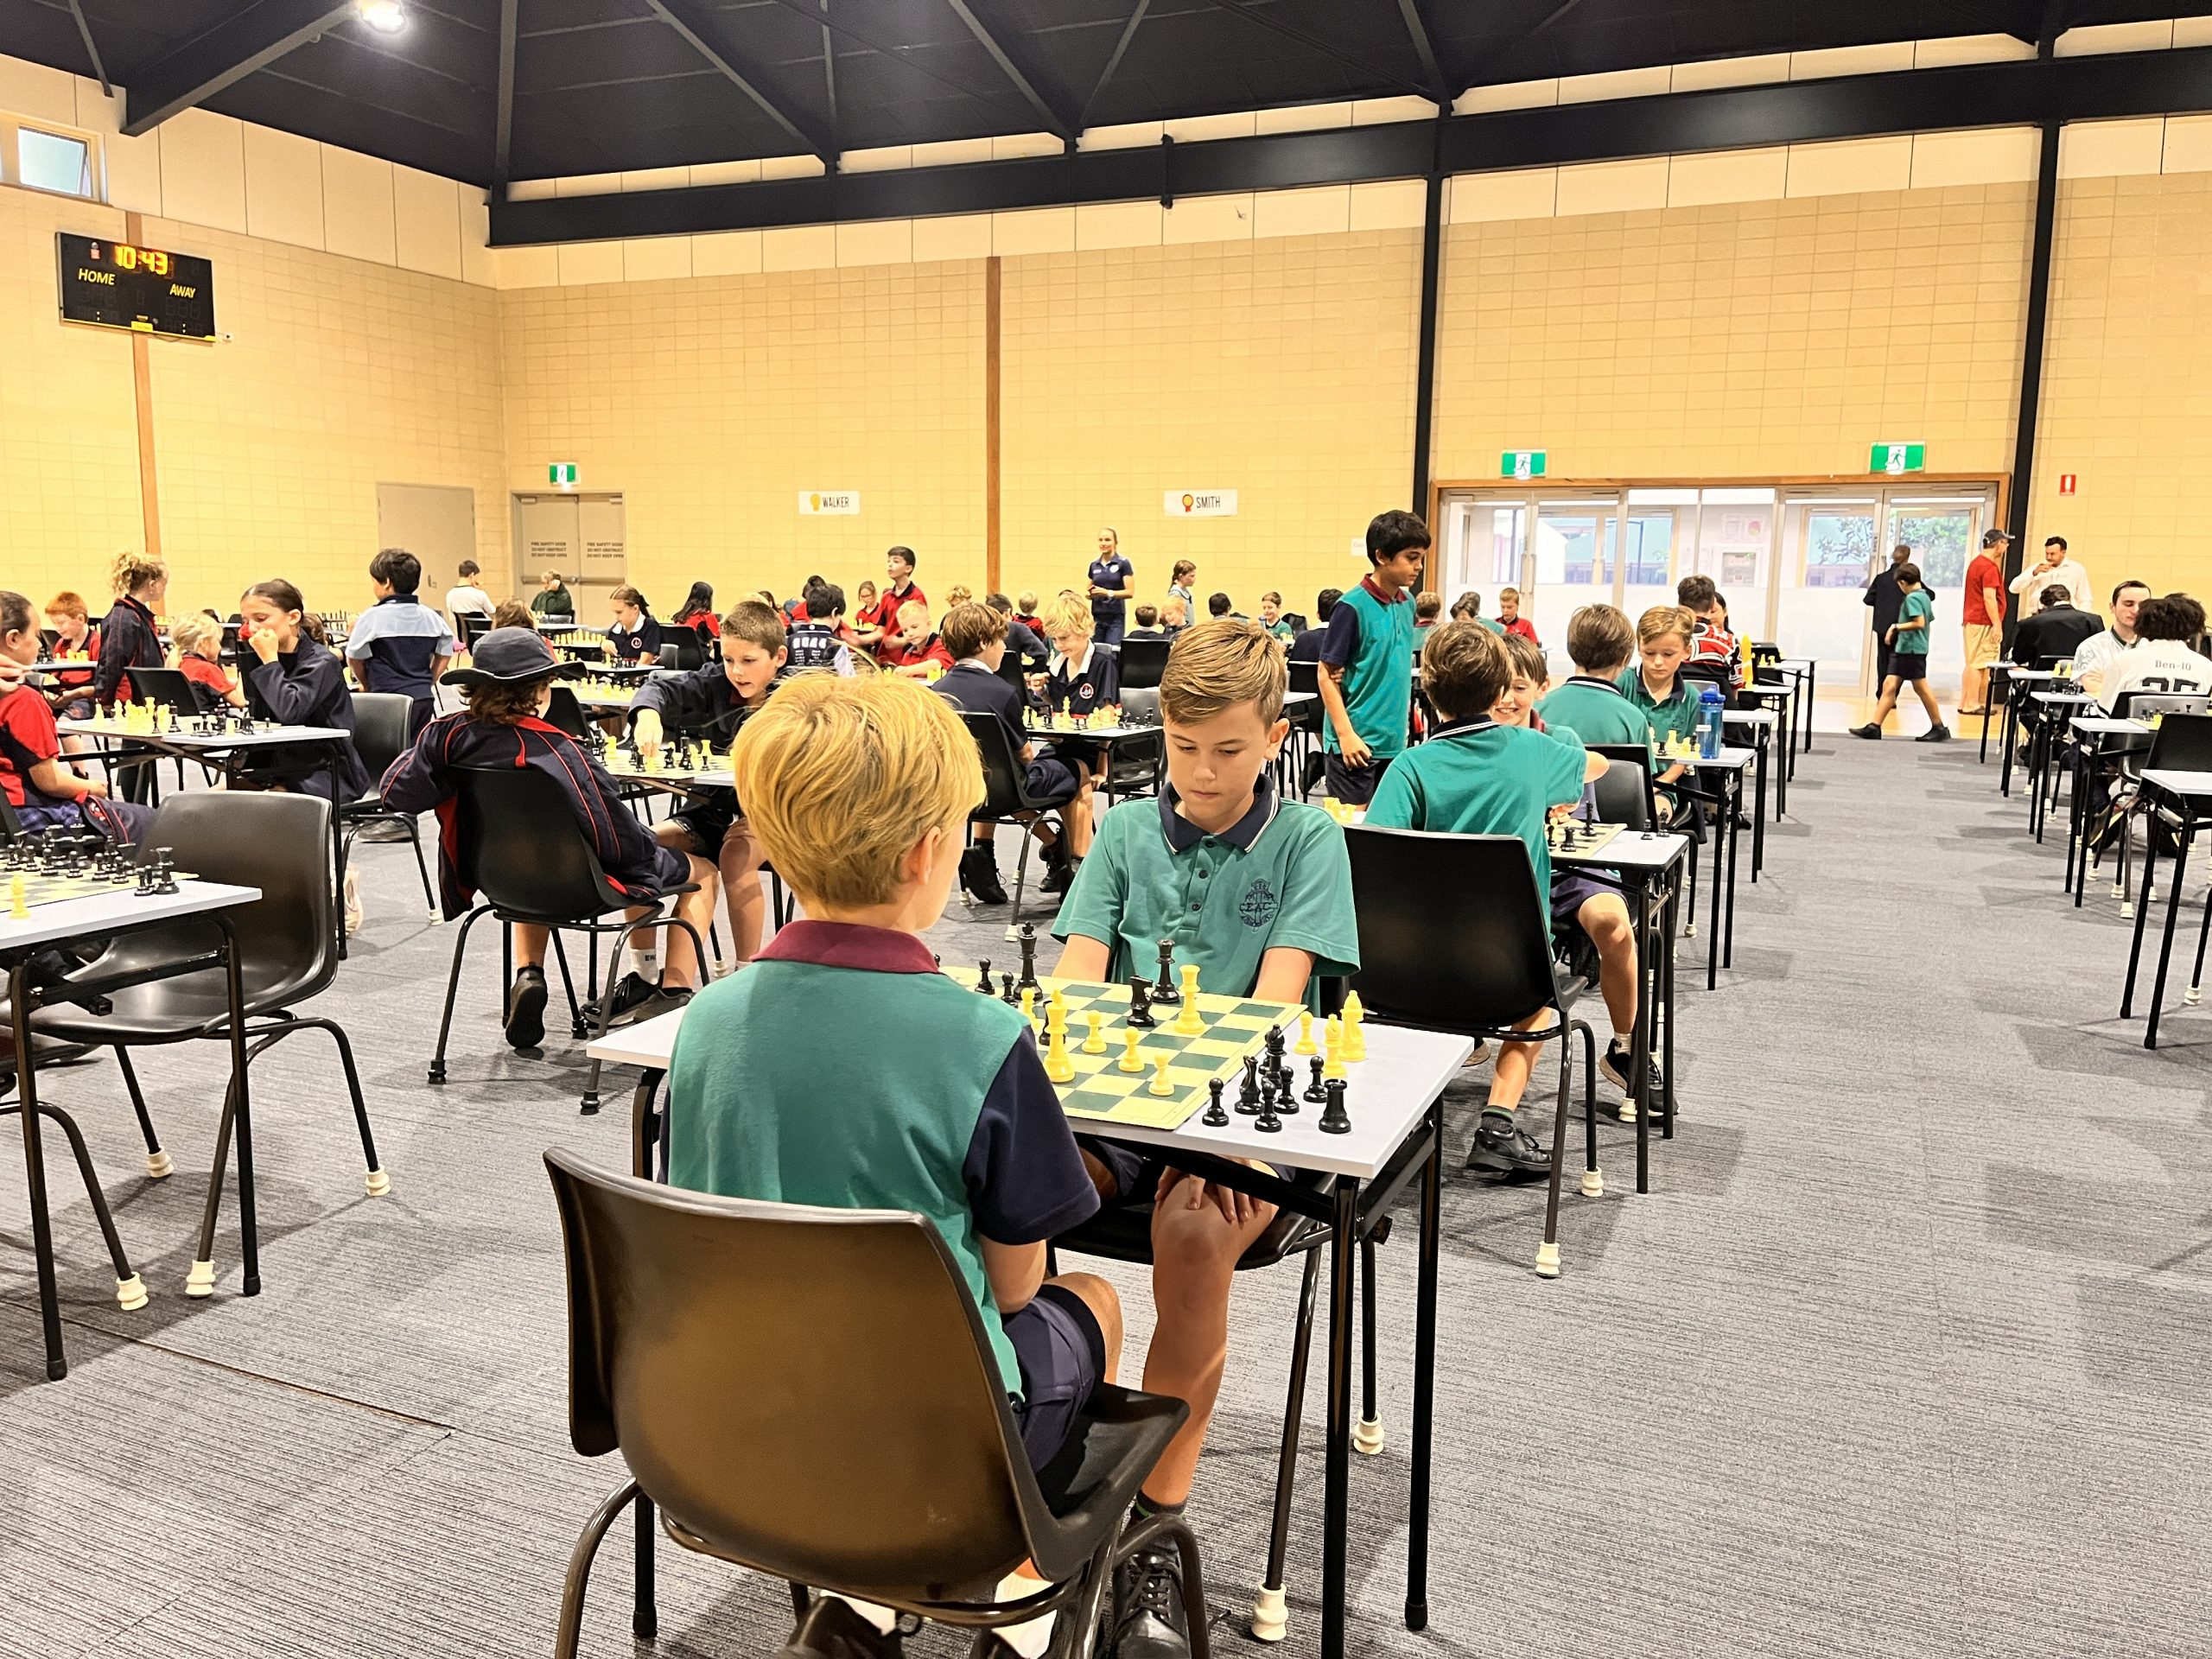 Team EAC in action at the Gardiner Chess Tournament this week